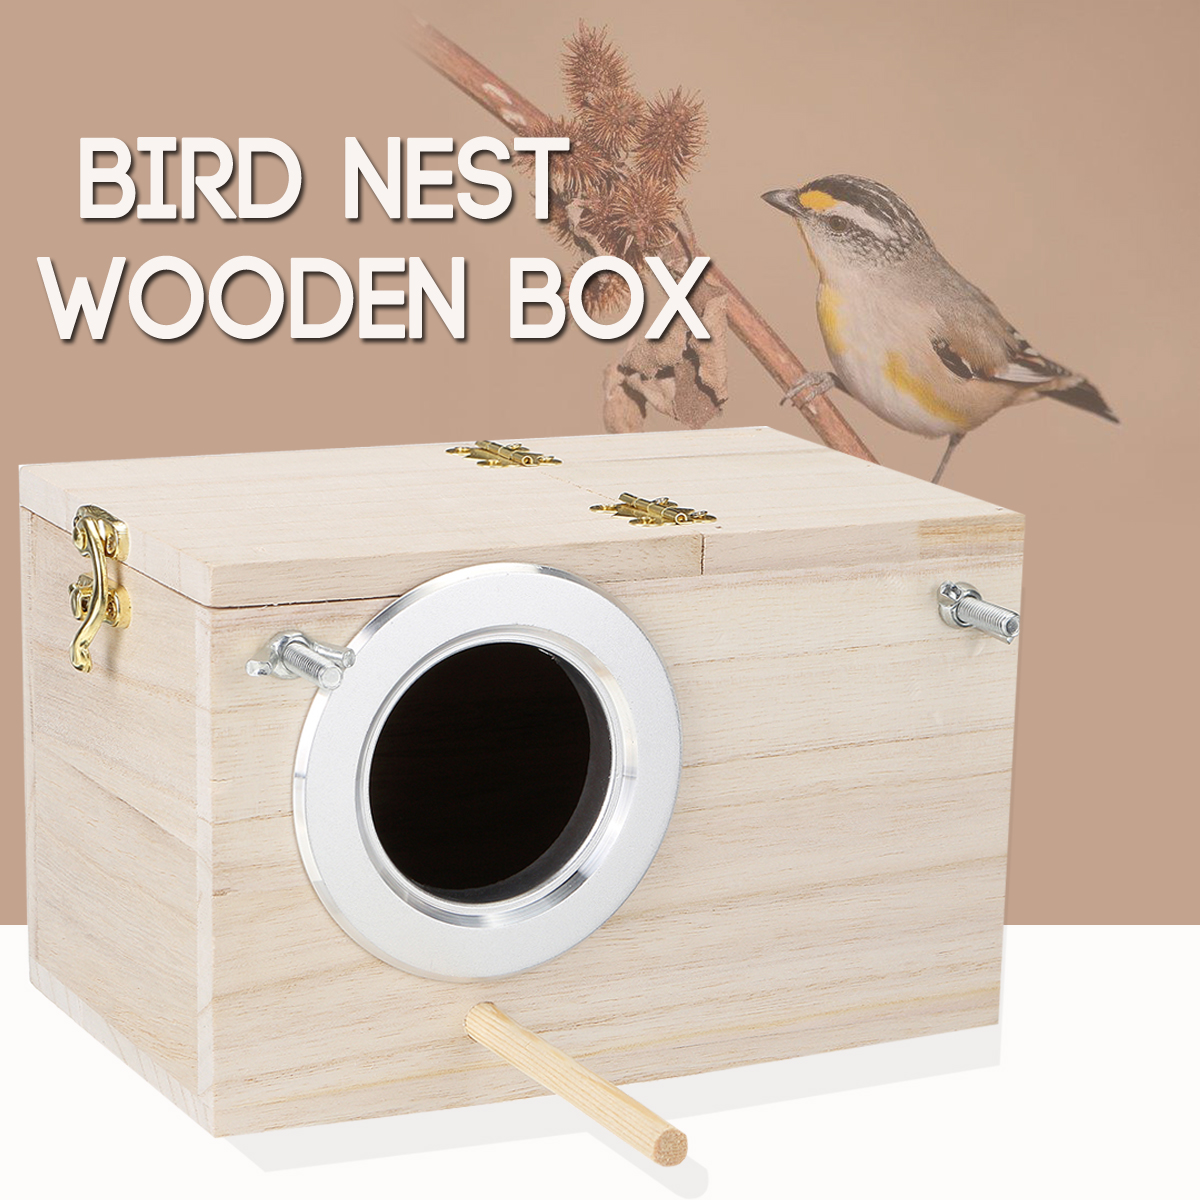 Budgie-Wooden-Box-Breeding-Boxes-Aviary-Bird-House-Nesting-w-Stick-Window-Security-Pet-Supplies-Home-1582150-2